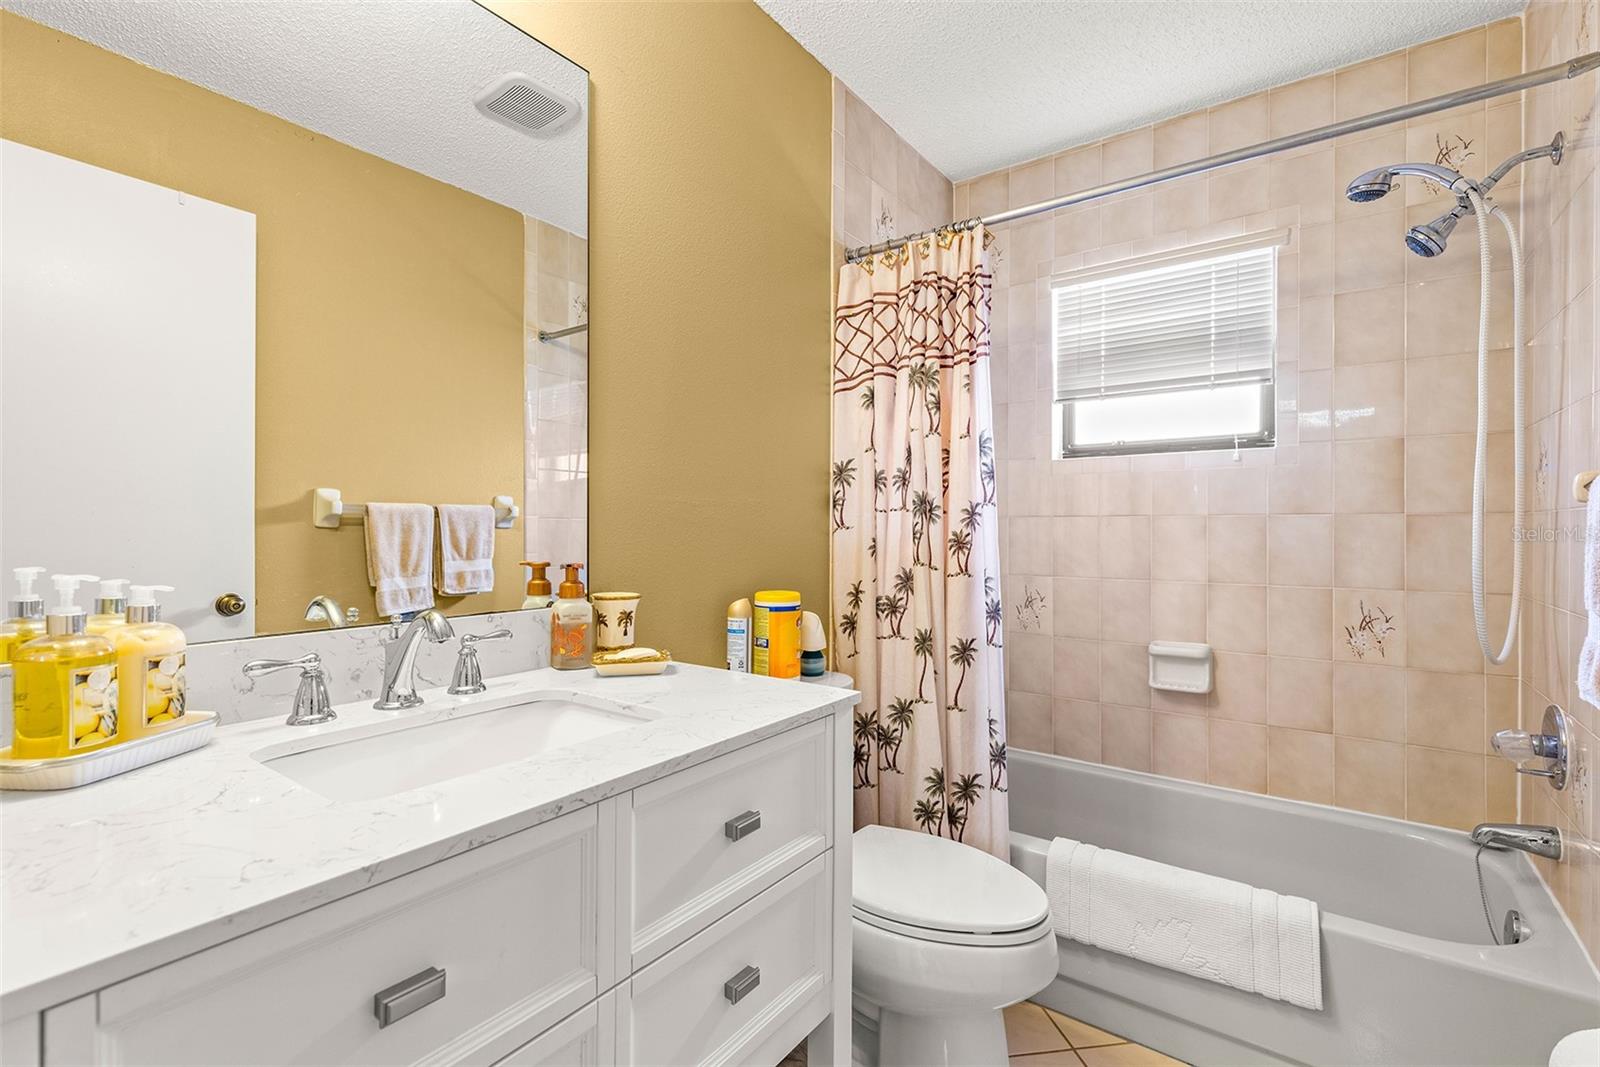 Secondary bathroom features a shower/tub combo with updated vanity and toilet